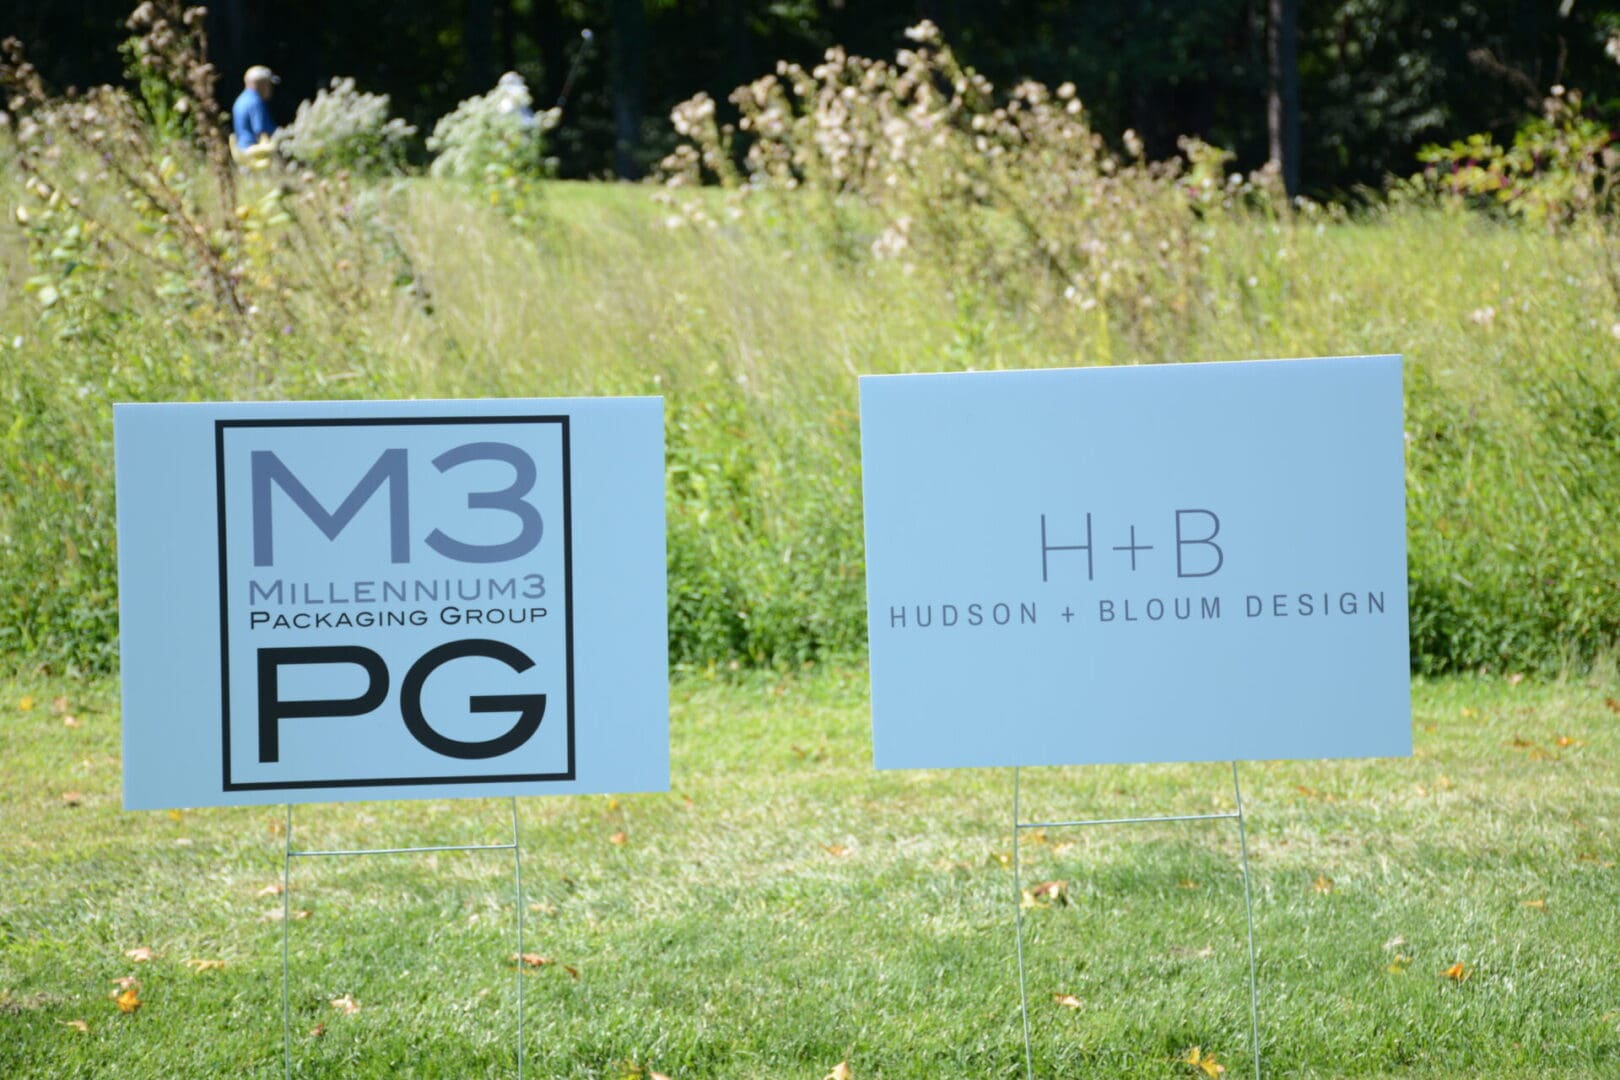 m3pg and h+b